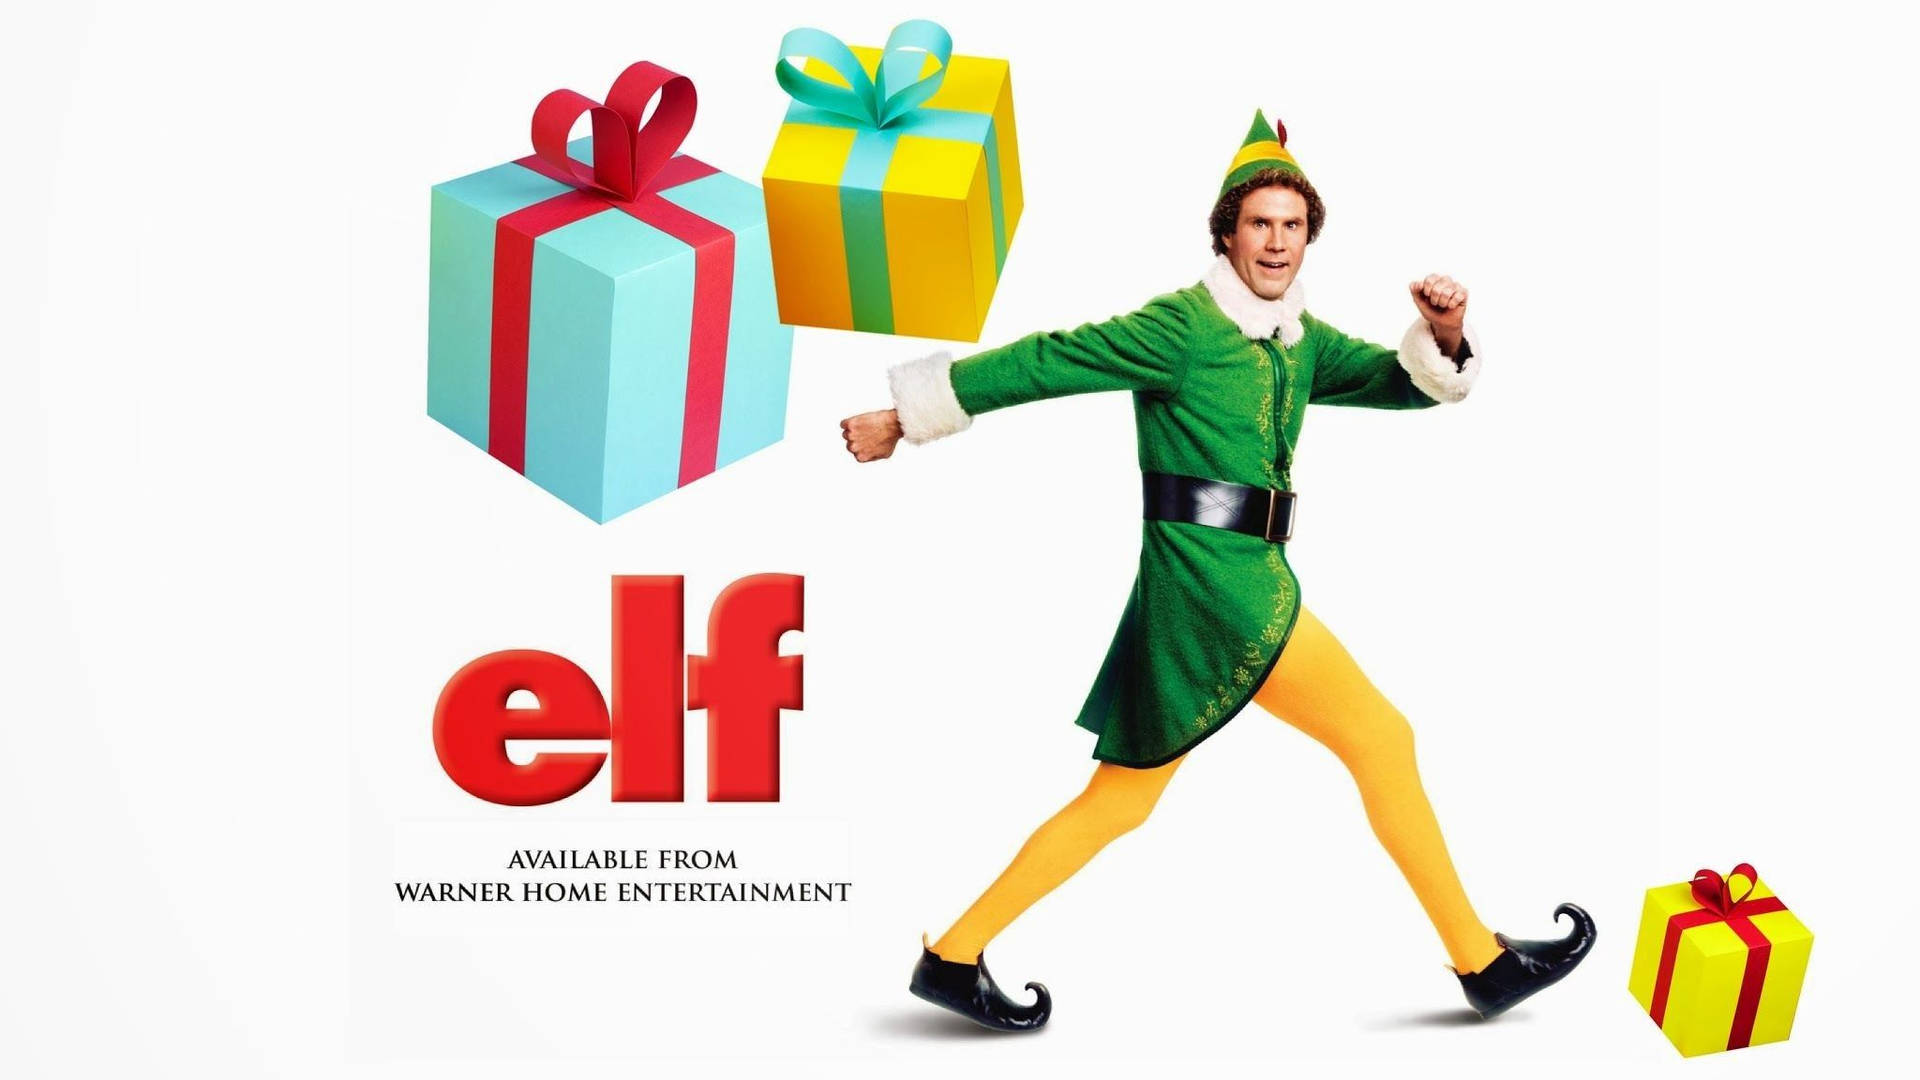 "Will Ferrell in the iconic Christmas film Elf (2003)" Wallpaper